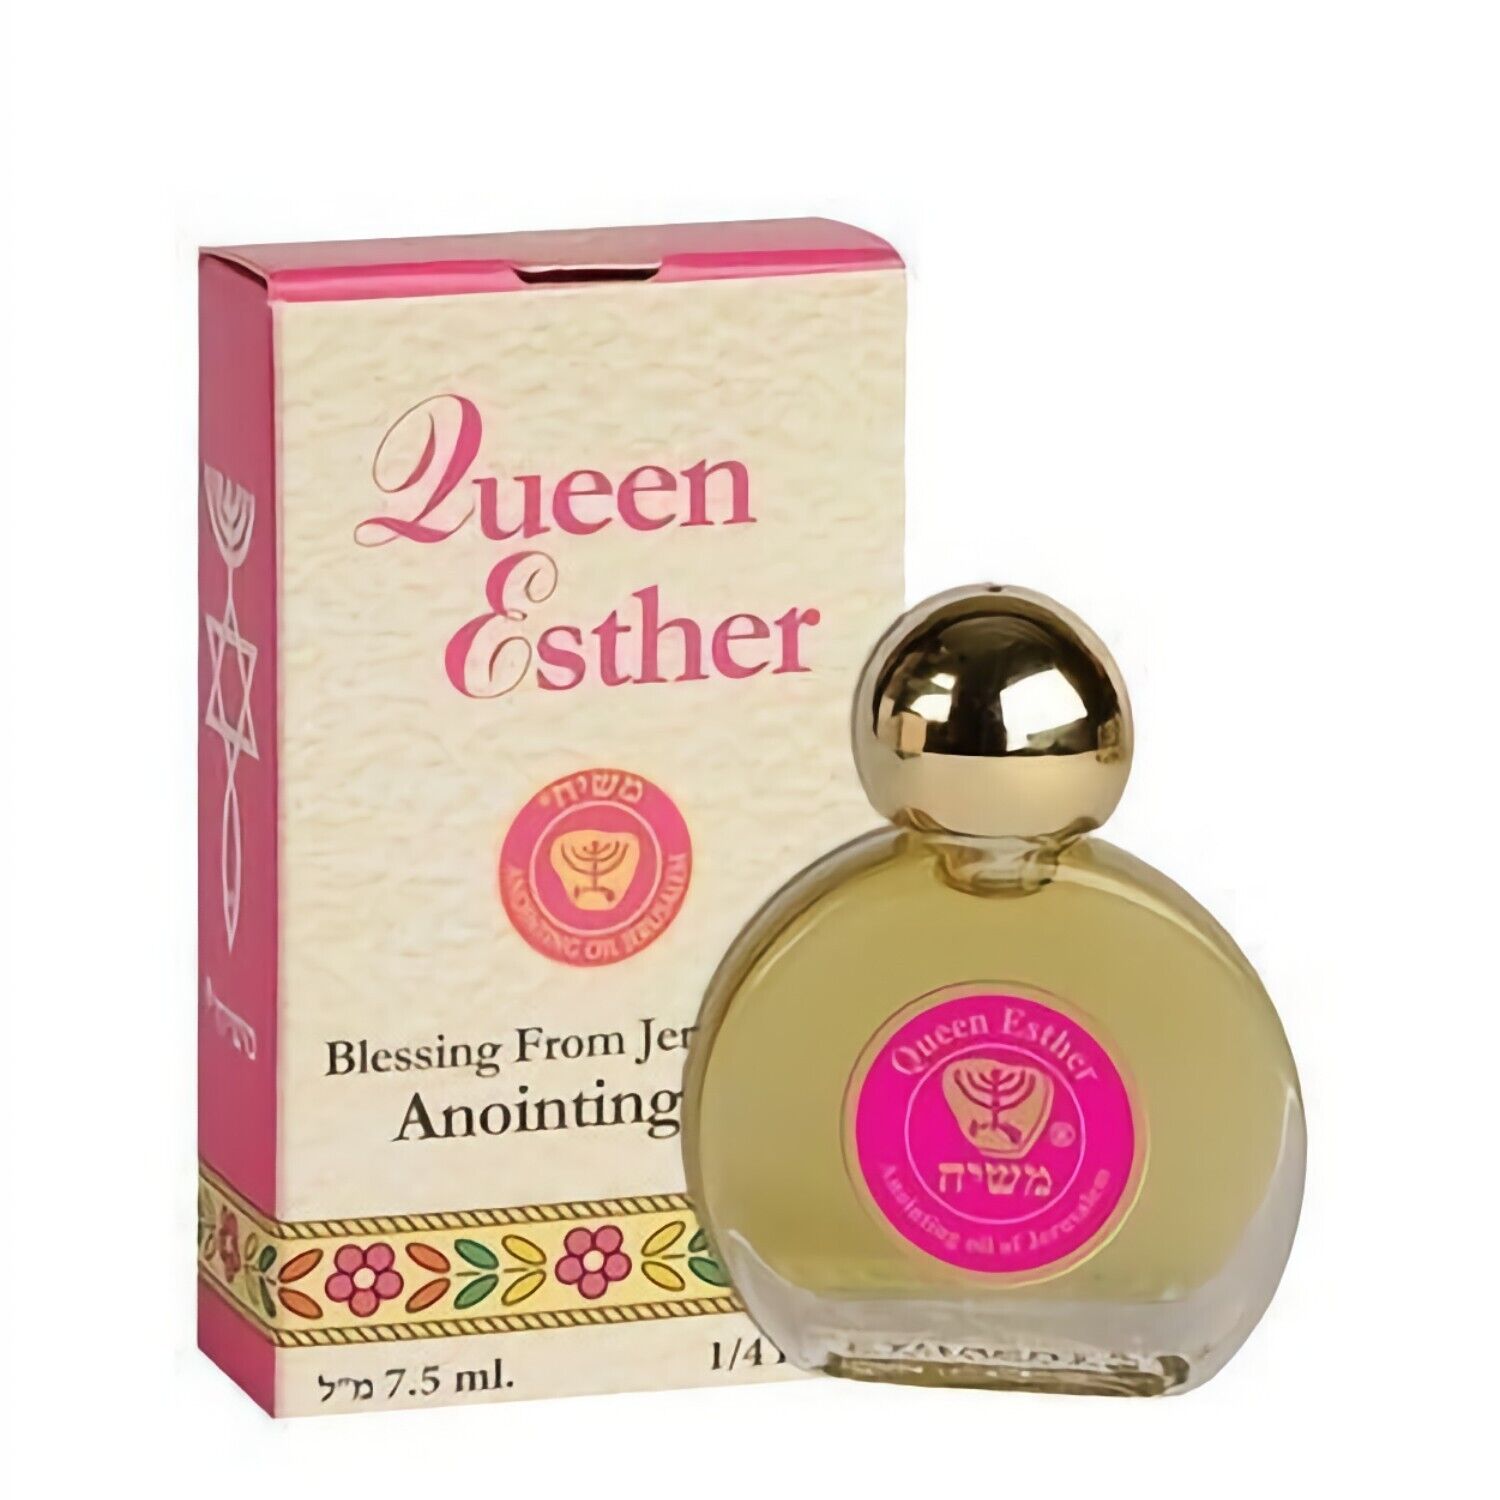 Queen Esther Holy Anointing Oil Bottle 7.5 ml/0.25 fl.oz. from Jerusalem Israel